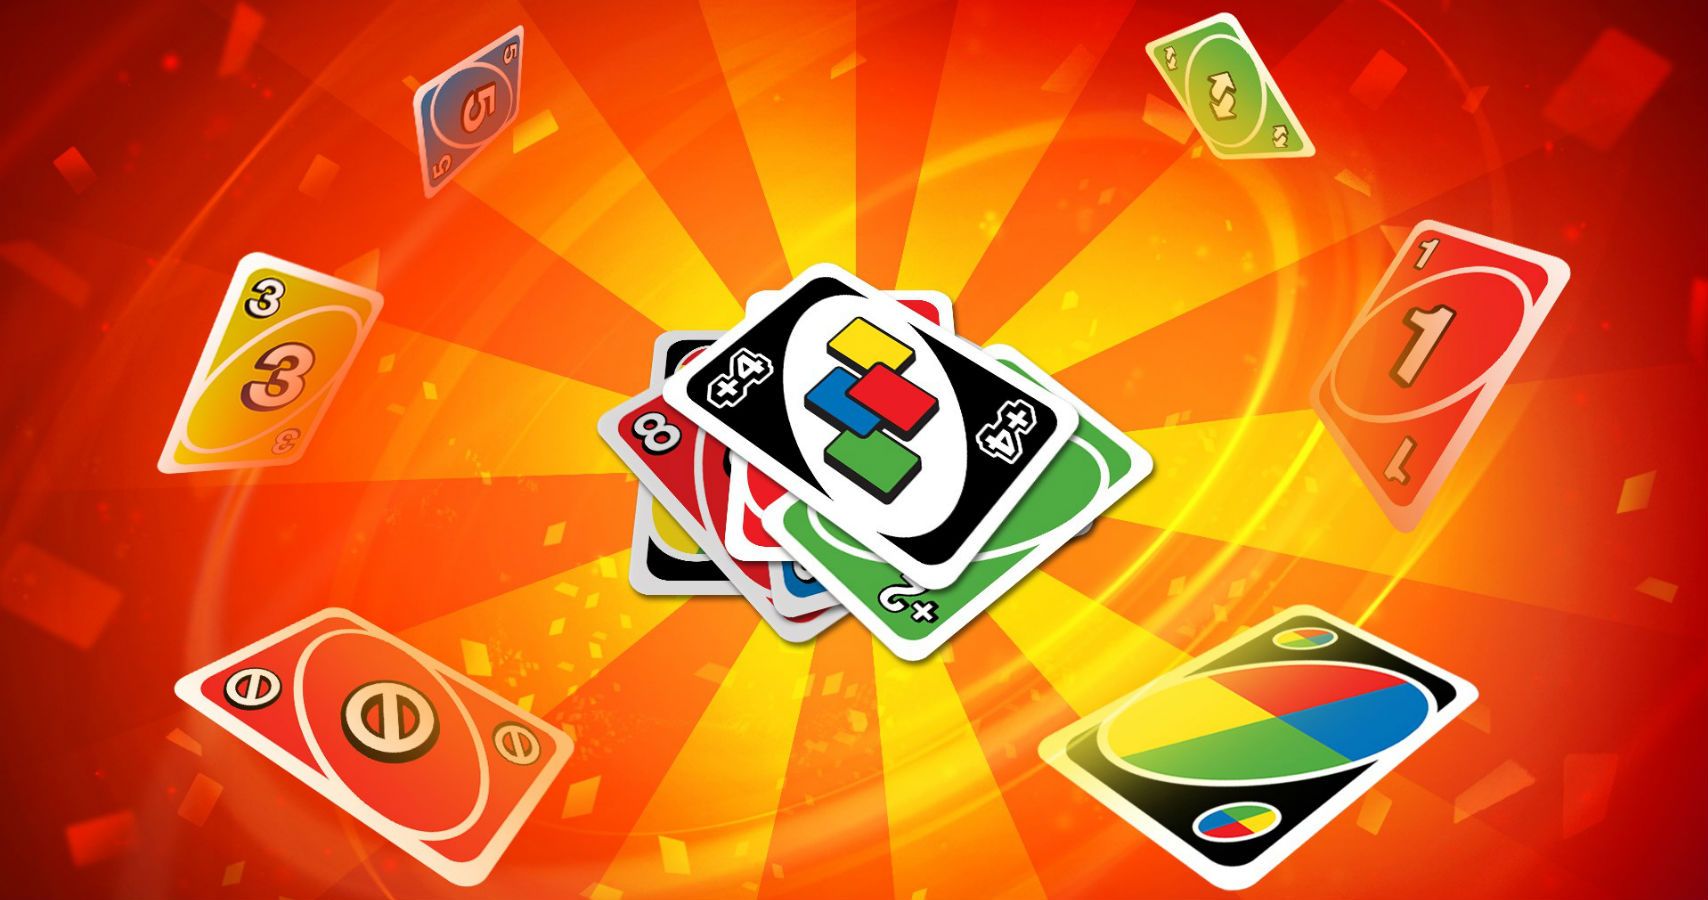 Uno Online: 4 Colors instal the new for android